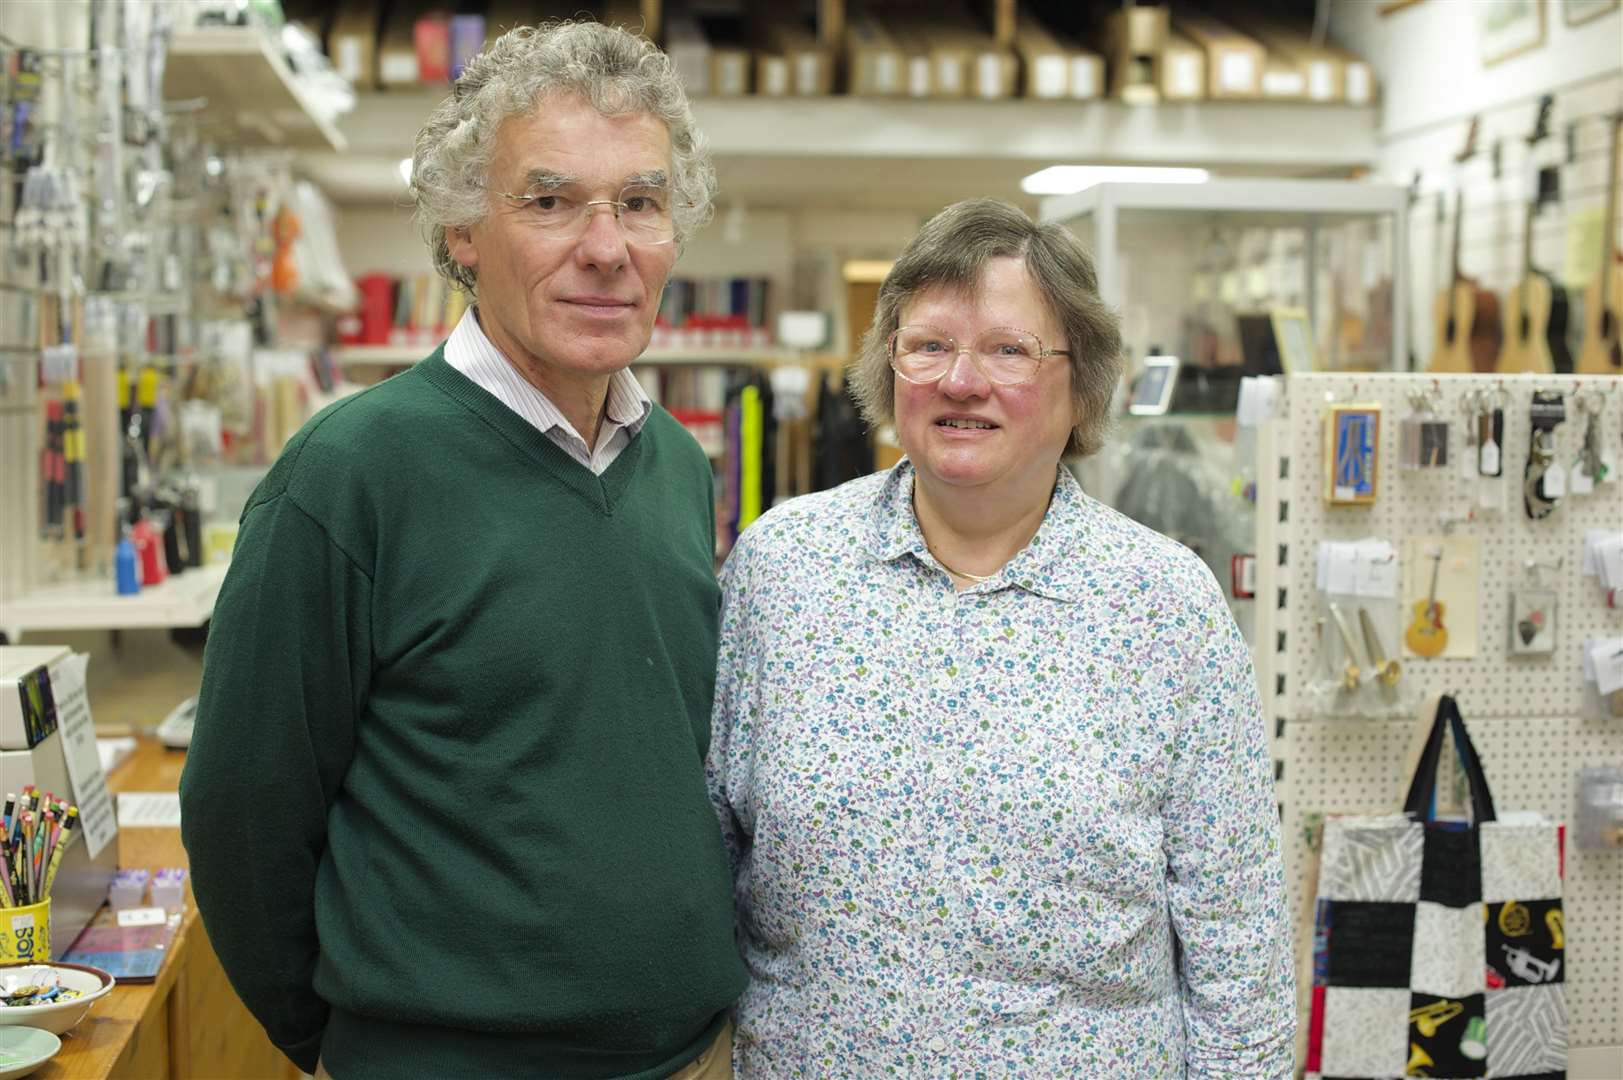 Robert and Cynthia Swade, of Swade Music, Roman Square, Sittingbourne. Picture: Andy Payton